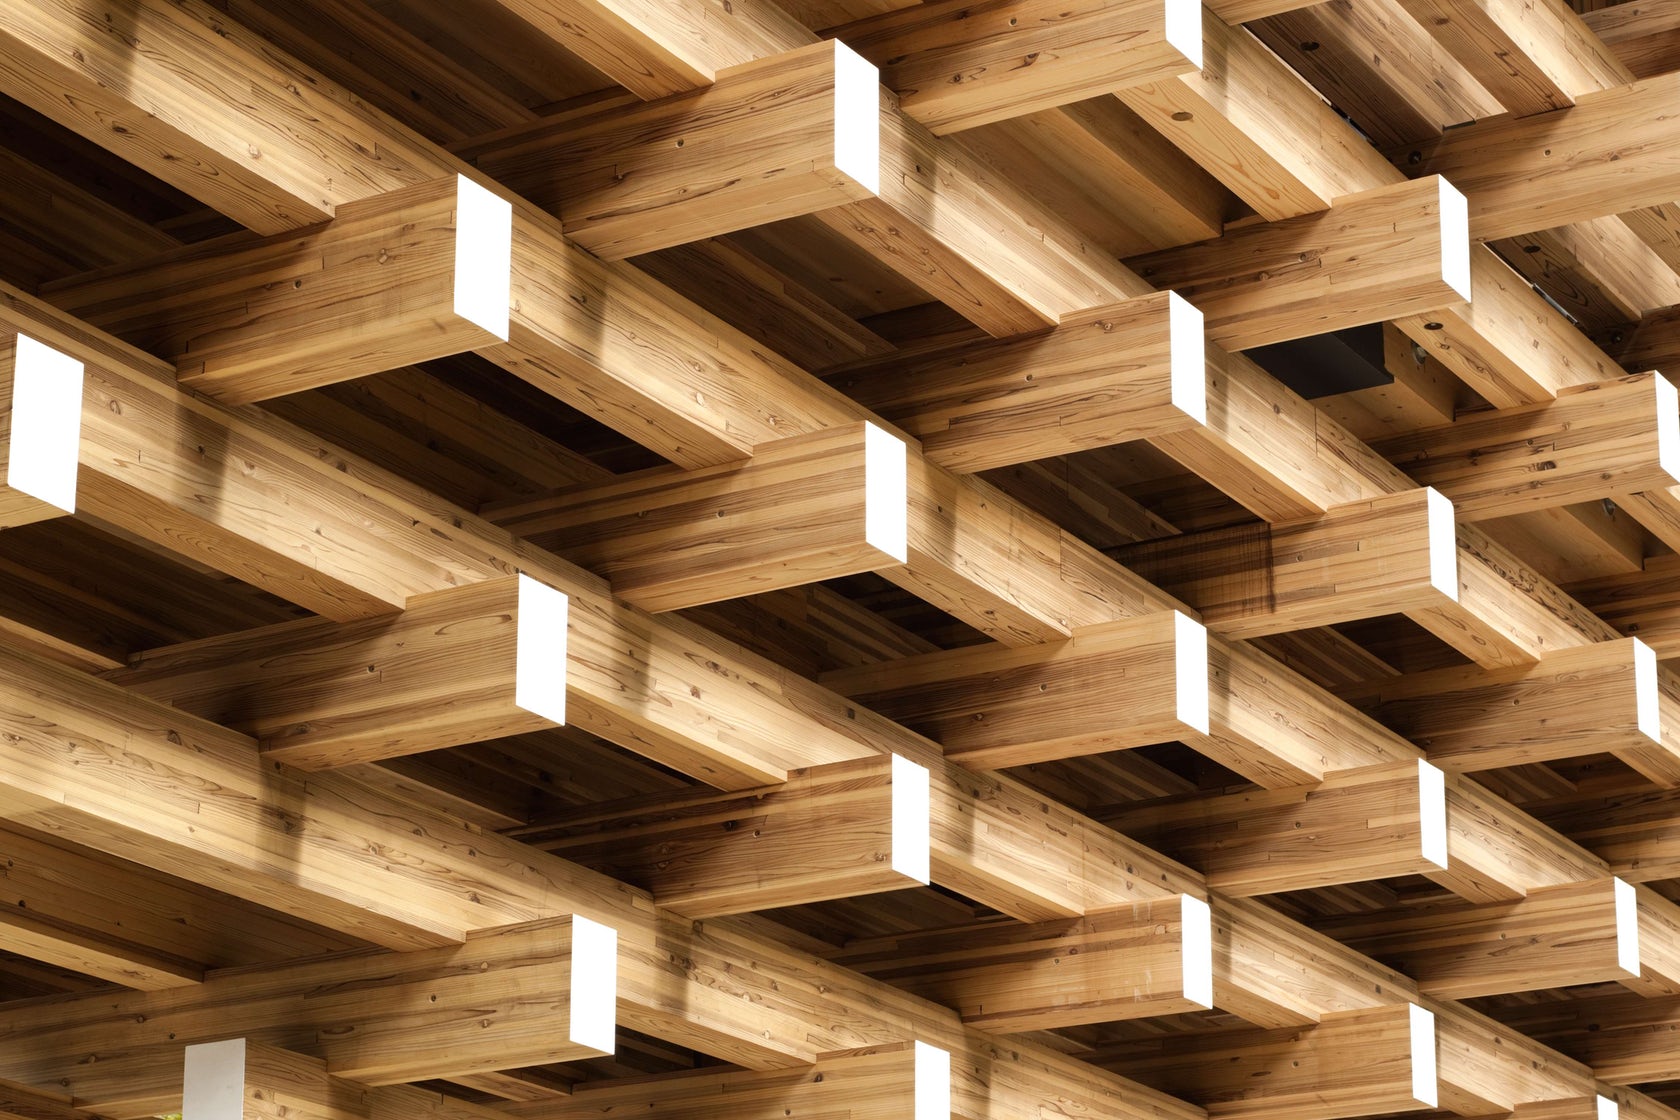 Glue-Laminated Timber Market Size, Share, Key Players, Industry Overview, Trends and Analysis 2022-2027